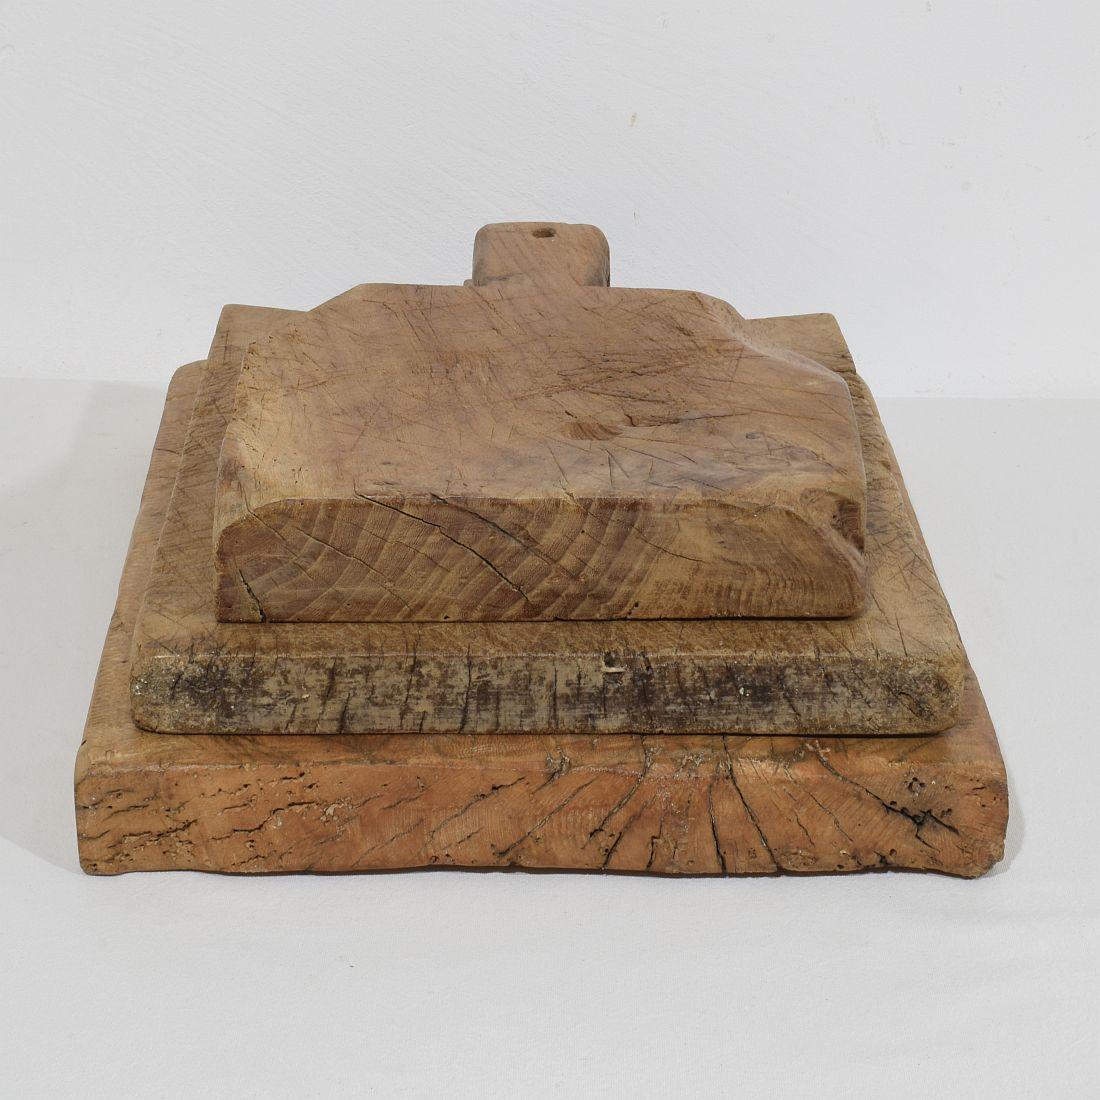 Collection of Three Rare French, 19th Century, Wooden Chopping or Cutting Boards 16